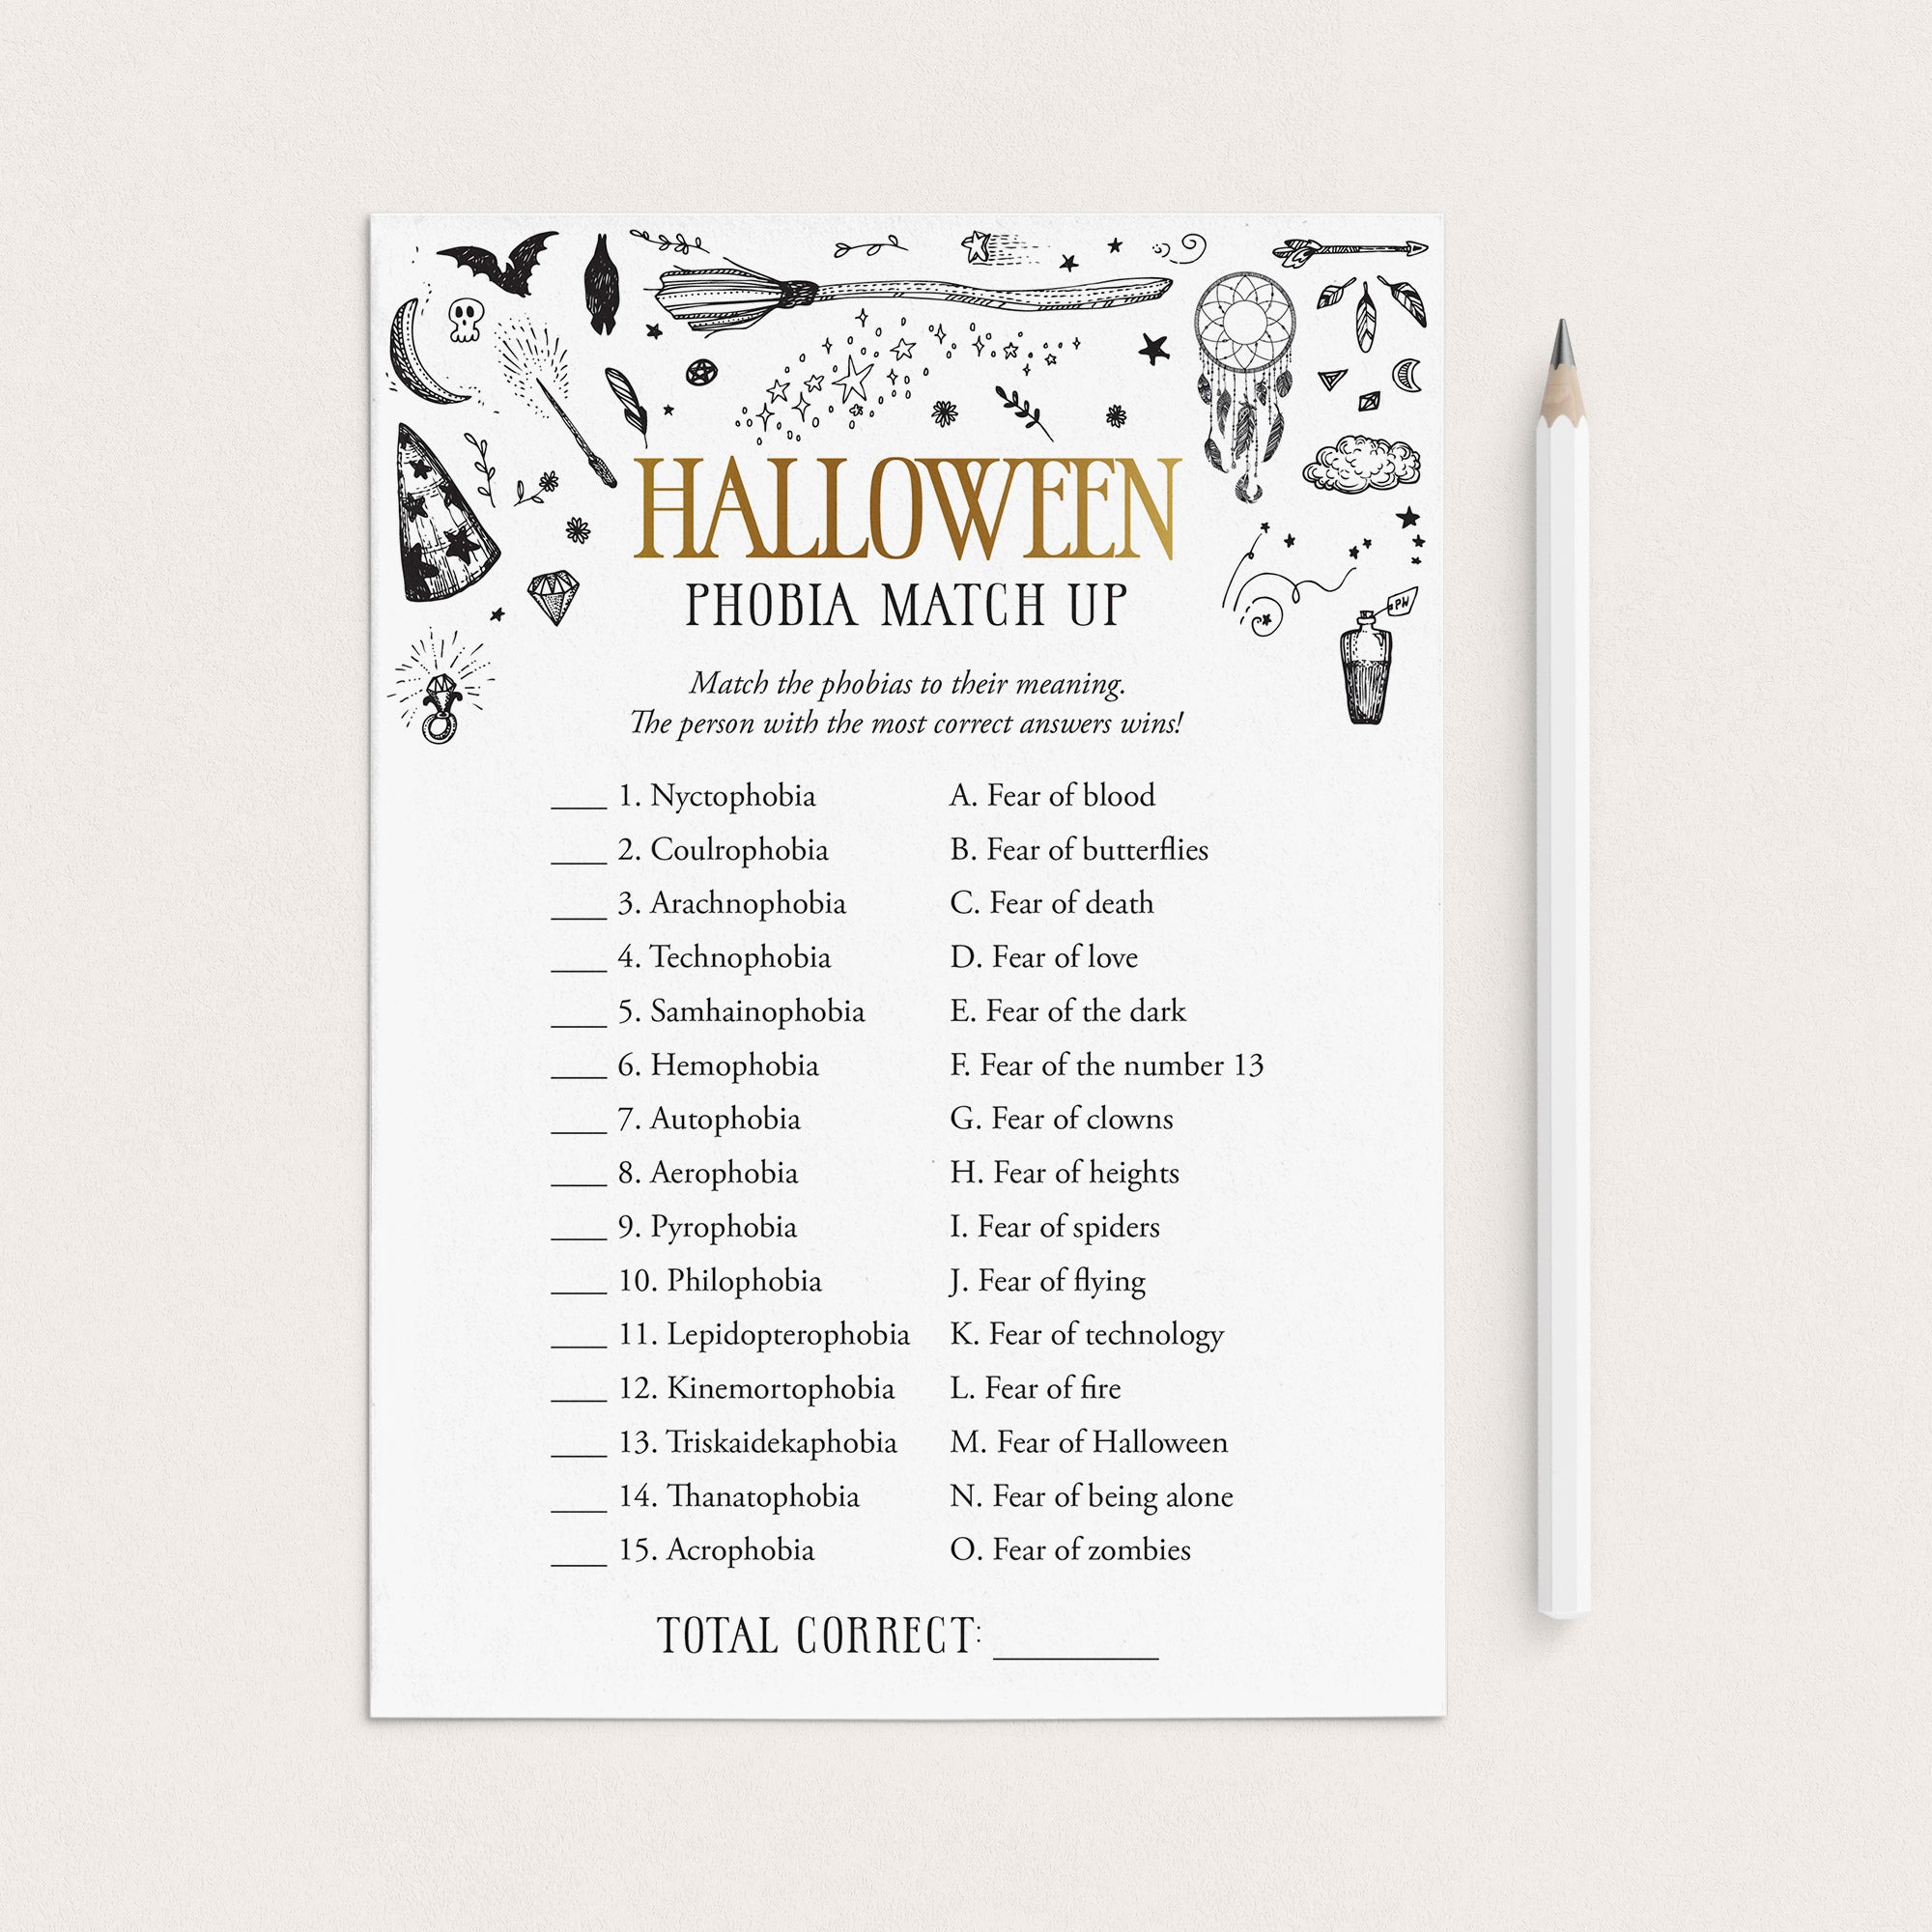 Halloween Phobia Matching Game with Answers Printable by LittleSizzle